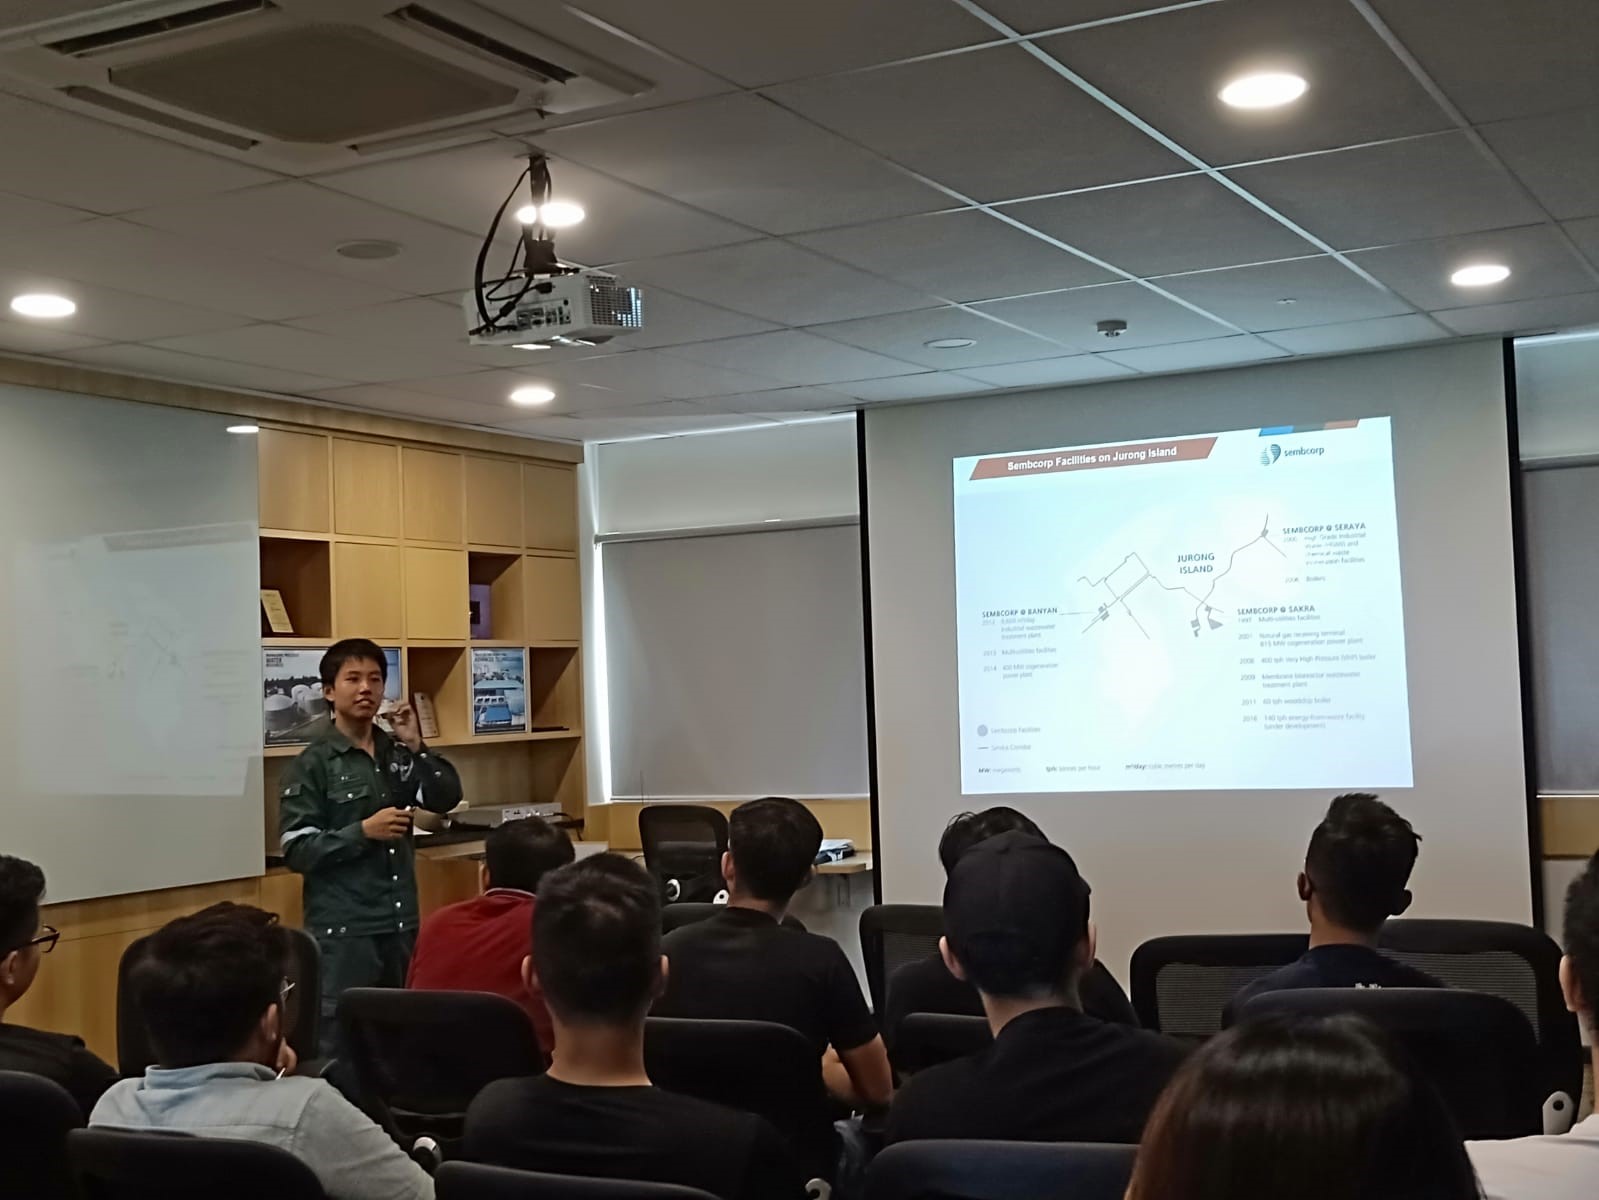 Sembcorp Industries Senior Engineer Ang Kang Jie sharing with students on operations at the Sembcorp Cogen @ Banyan Plant.